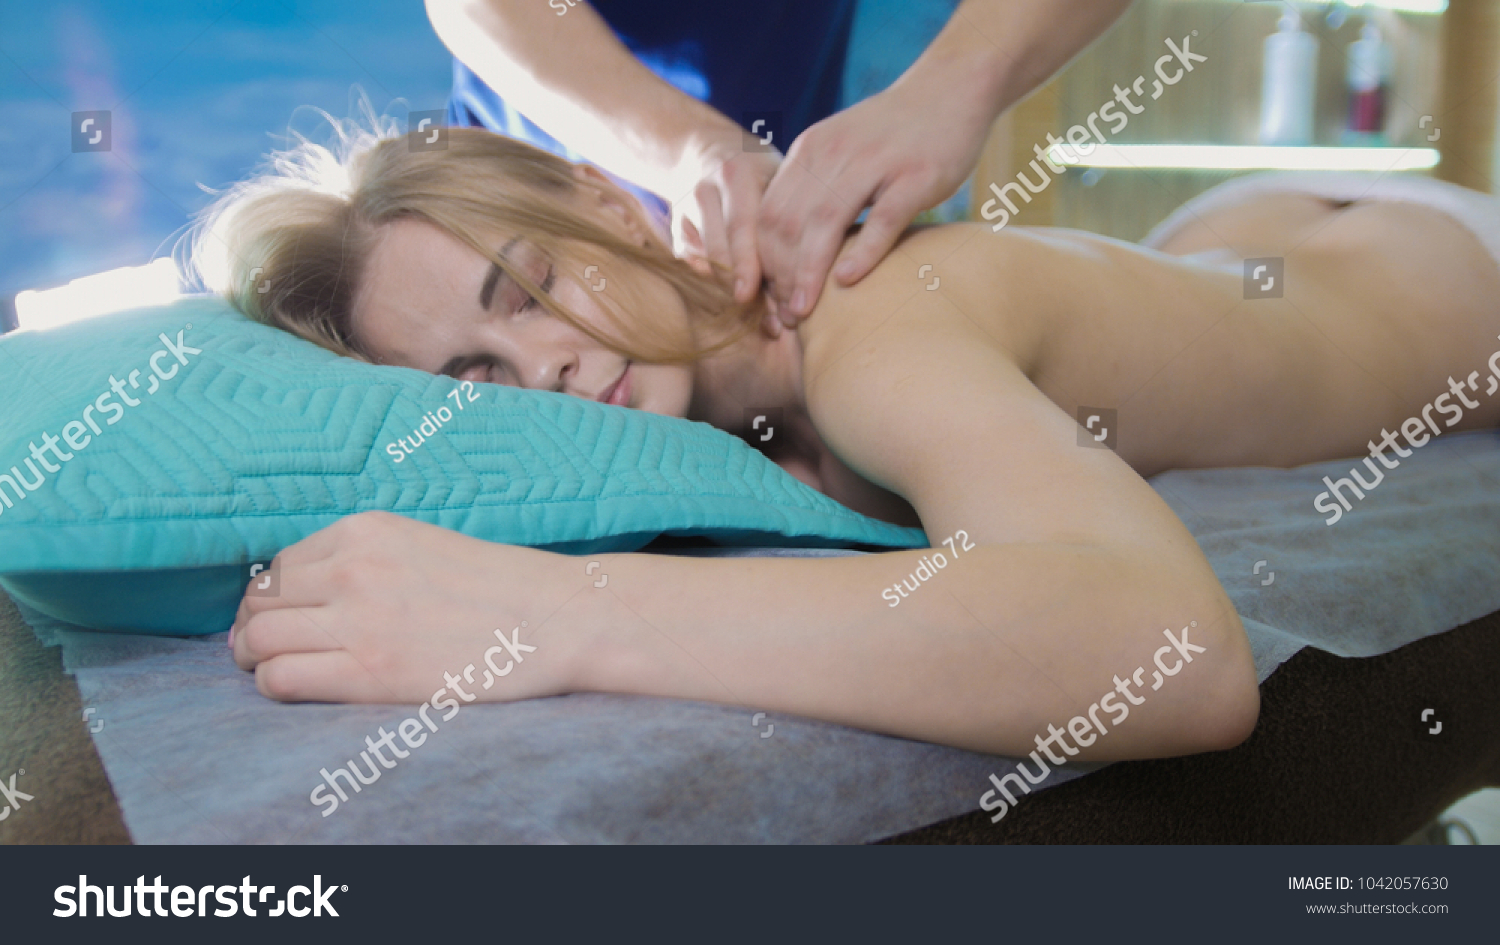 Massage parlor - young girl gets relaxing healing therapy for head #1042057630